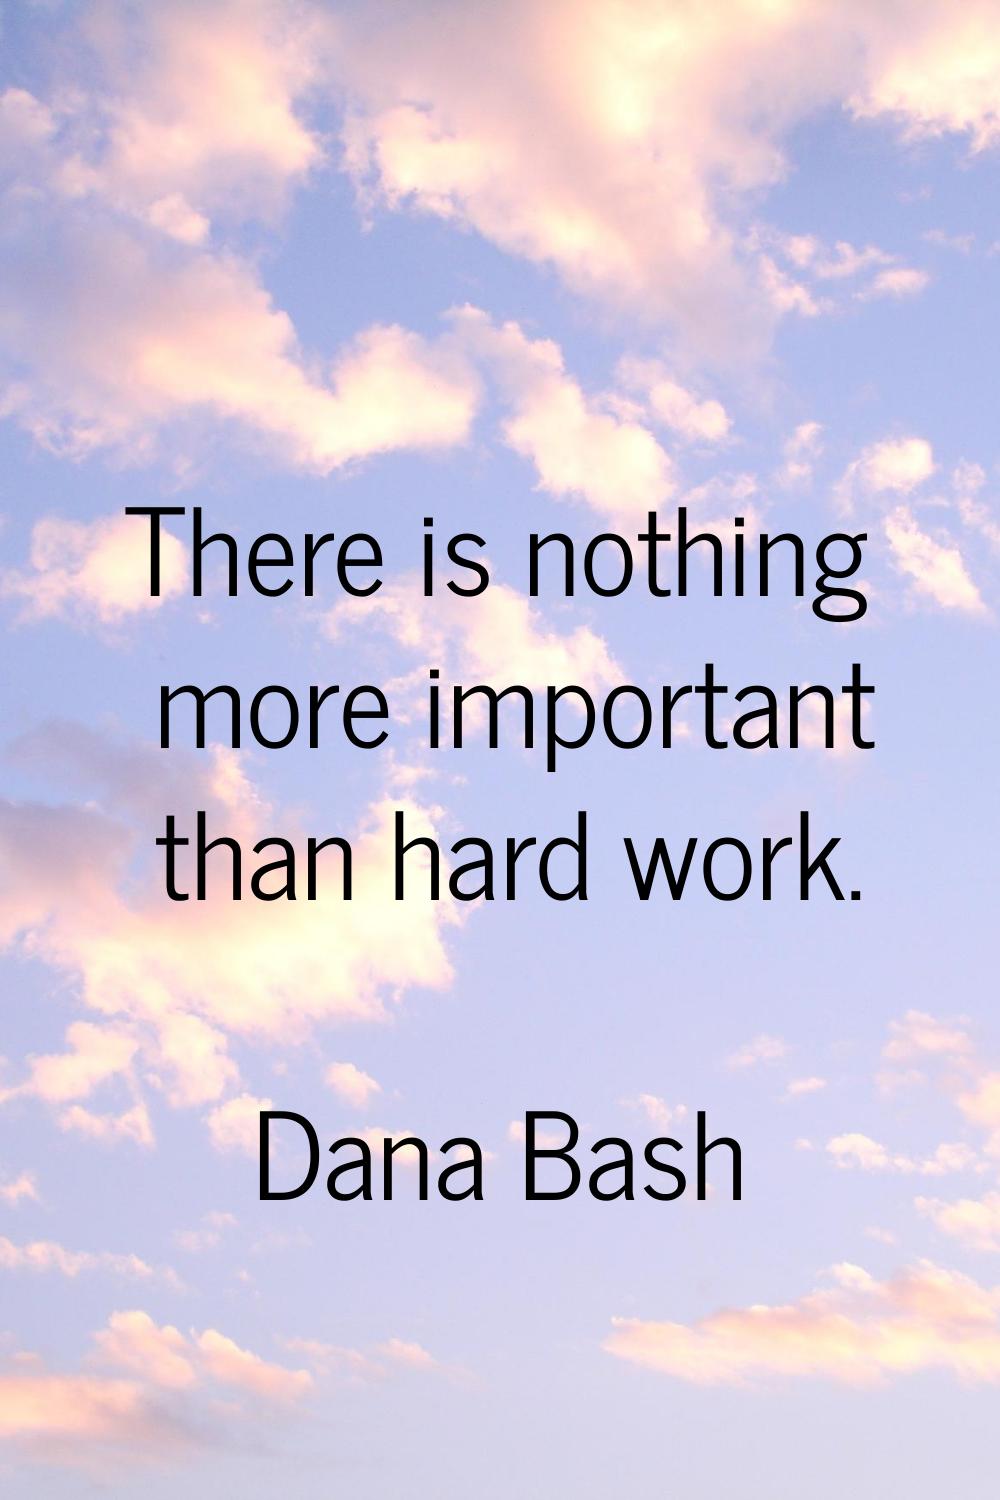 There is nothing more important than hard work.